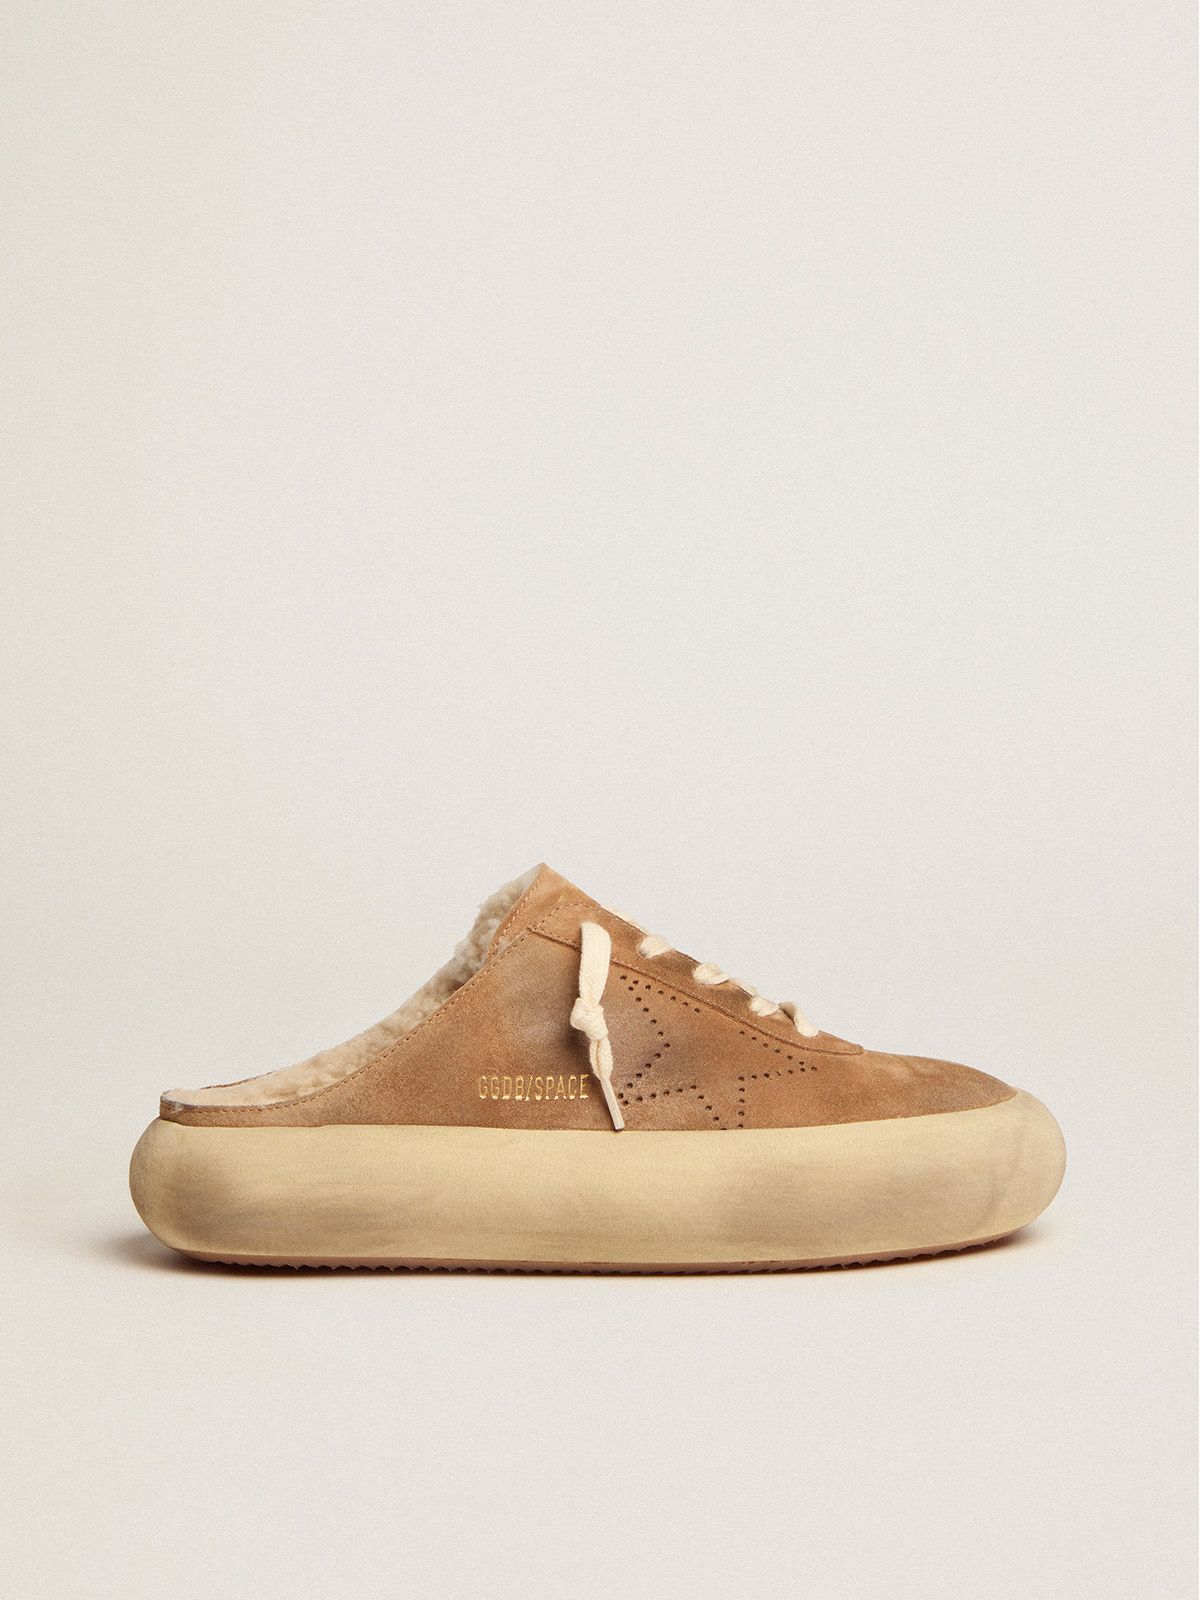 golden goose suede with in Space-Star Sabot tobacco-colored shoes lining shearling